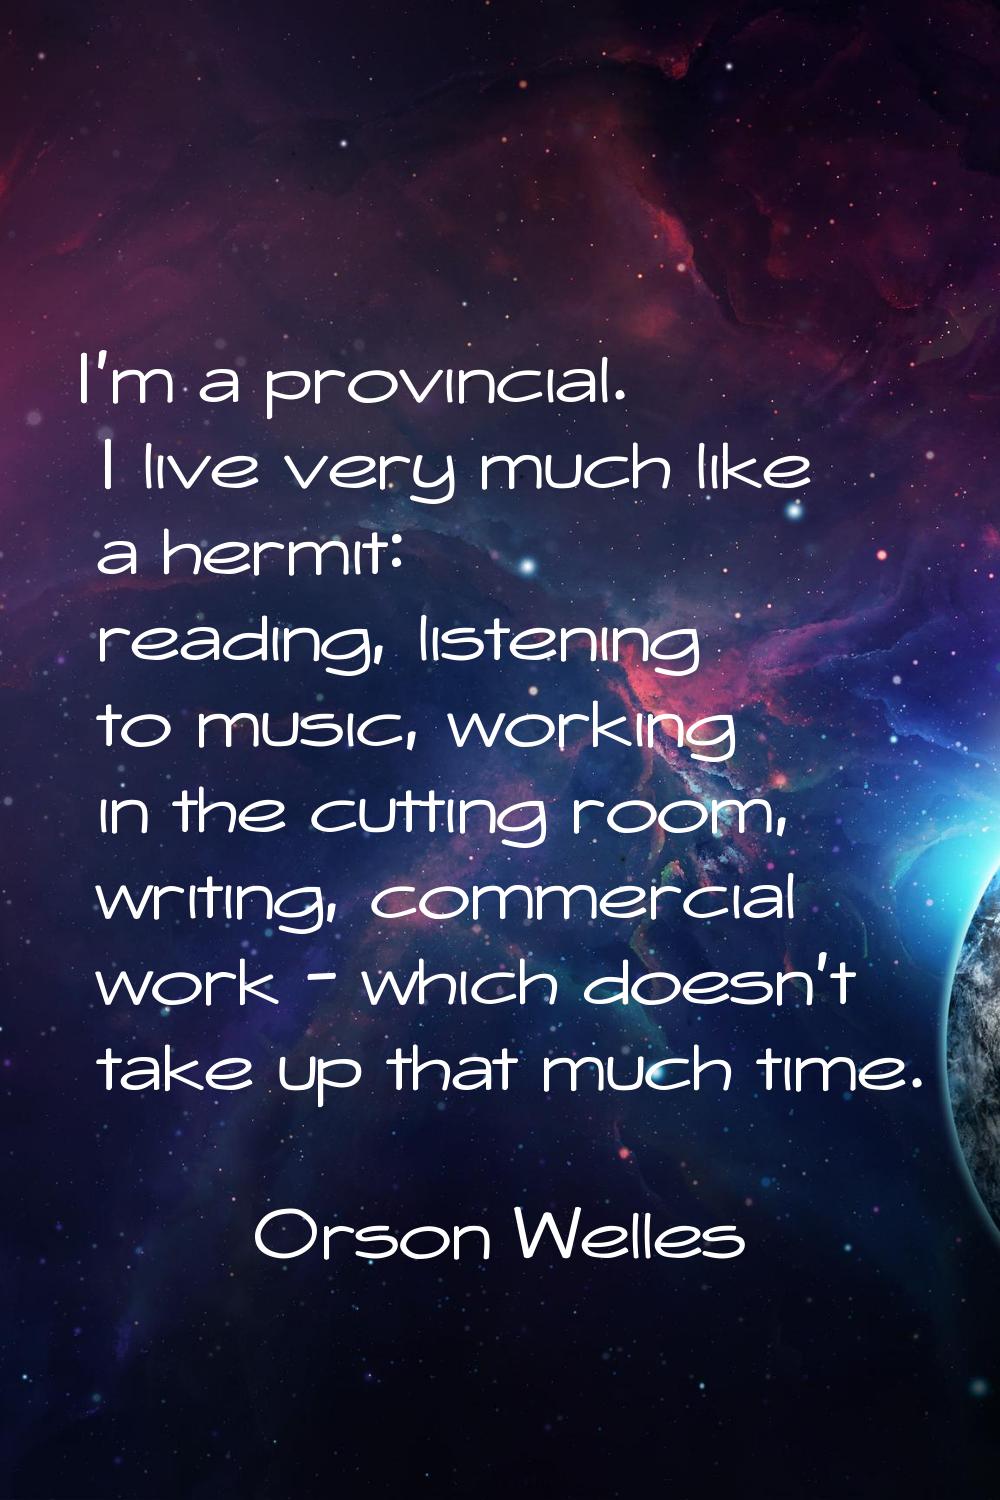 I'm a provincial. I live very much like a hermit: reading, listening to music, working in the cutti